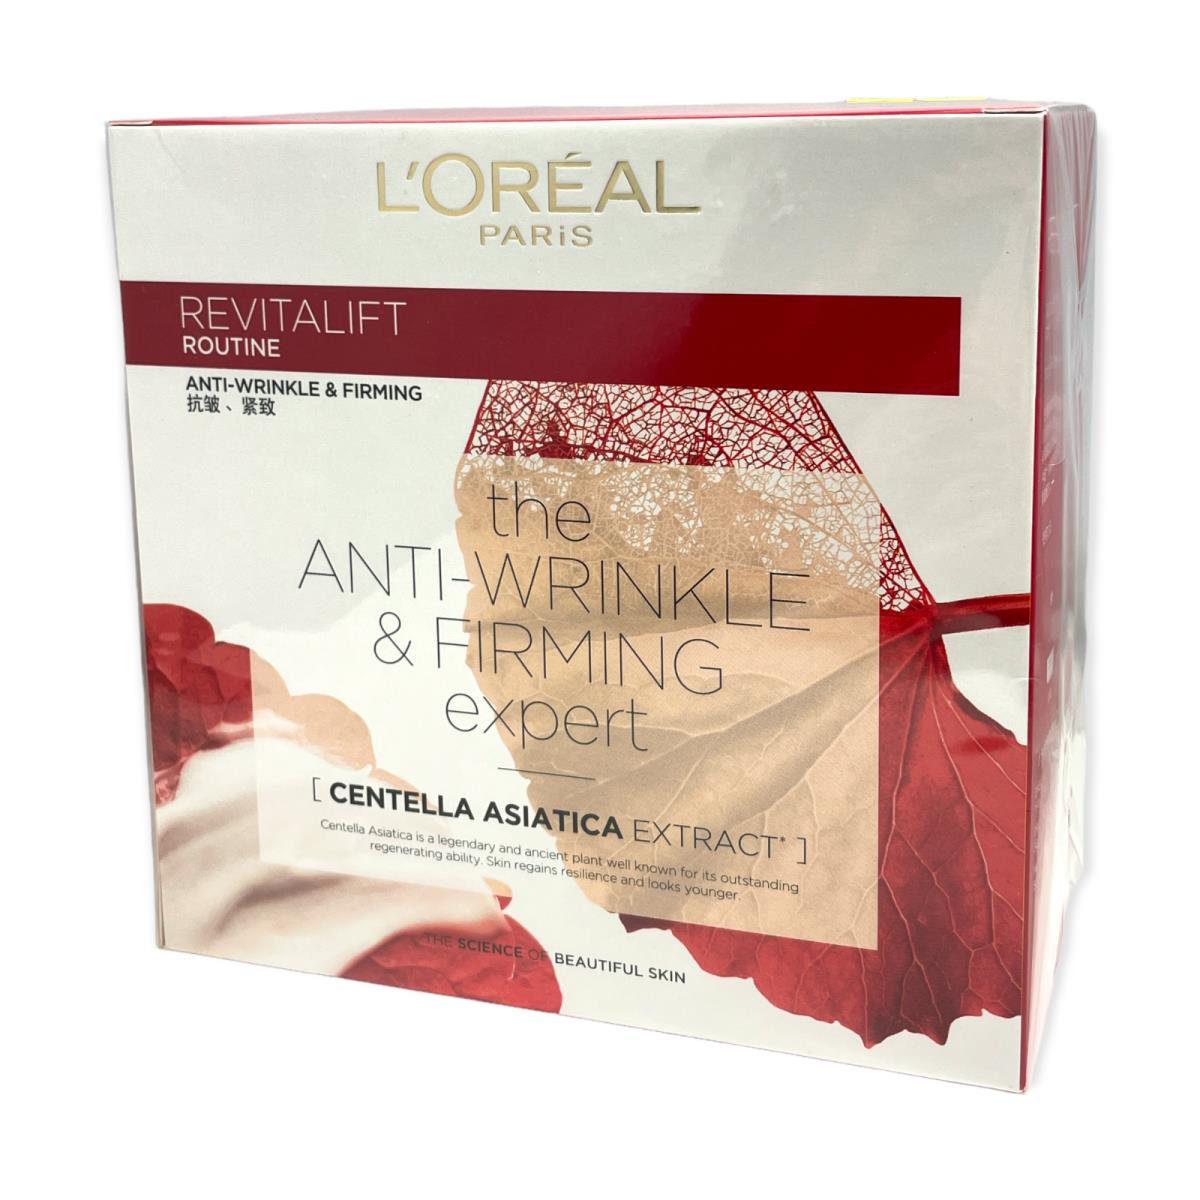 L`oreal The Anti-wrinkle Firming Expert Centella Asiatica Extract 3Pc Set